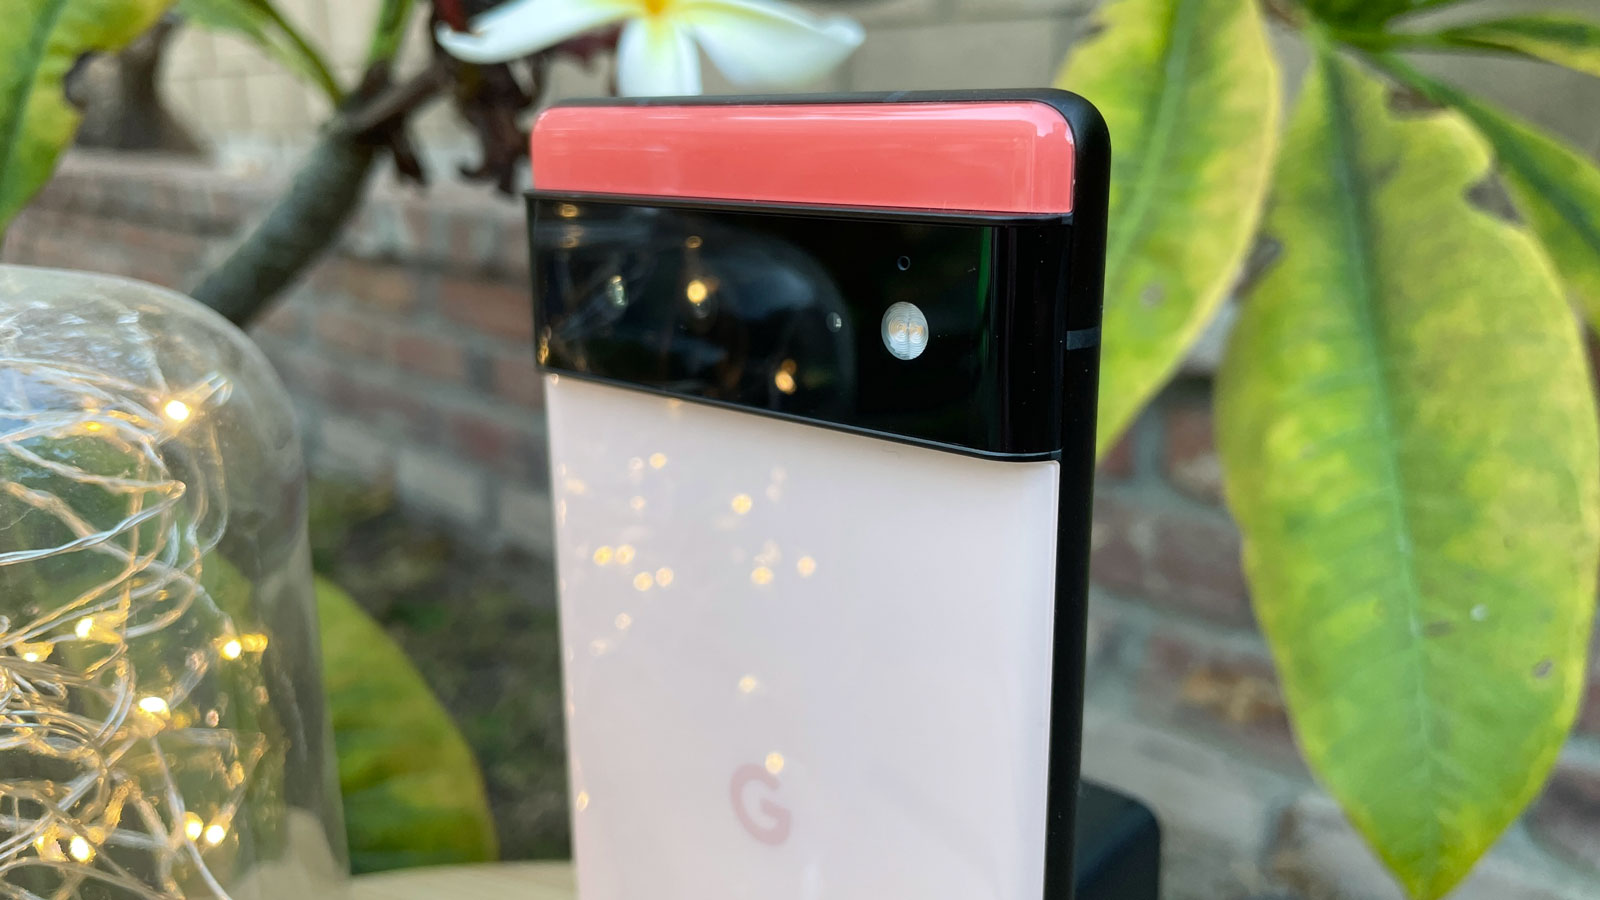 A close-up of the cameras on a Google Pixel 6